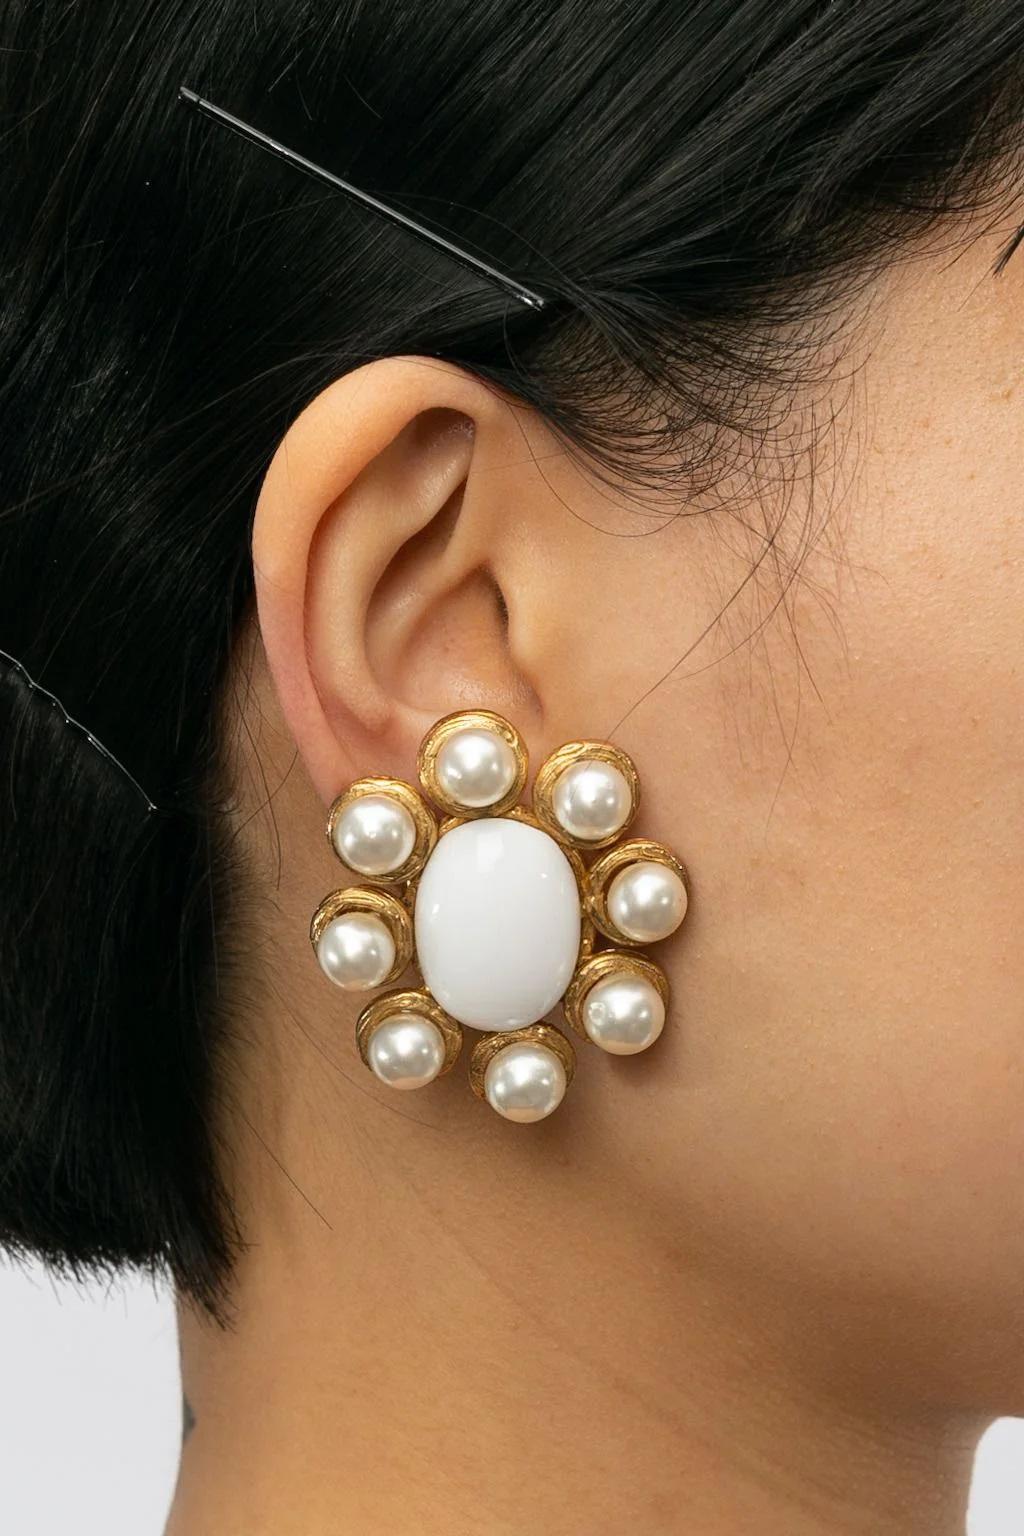 Chanel (Made in France) Gilted metal clip-on earrings, made of faux pearls and glass paste. Spring - Summer 1993 collection.

Additional information:
Dimensions: 4.2 W x 4.5 H cm (1.65